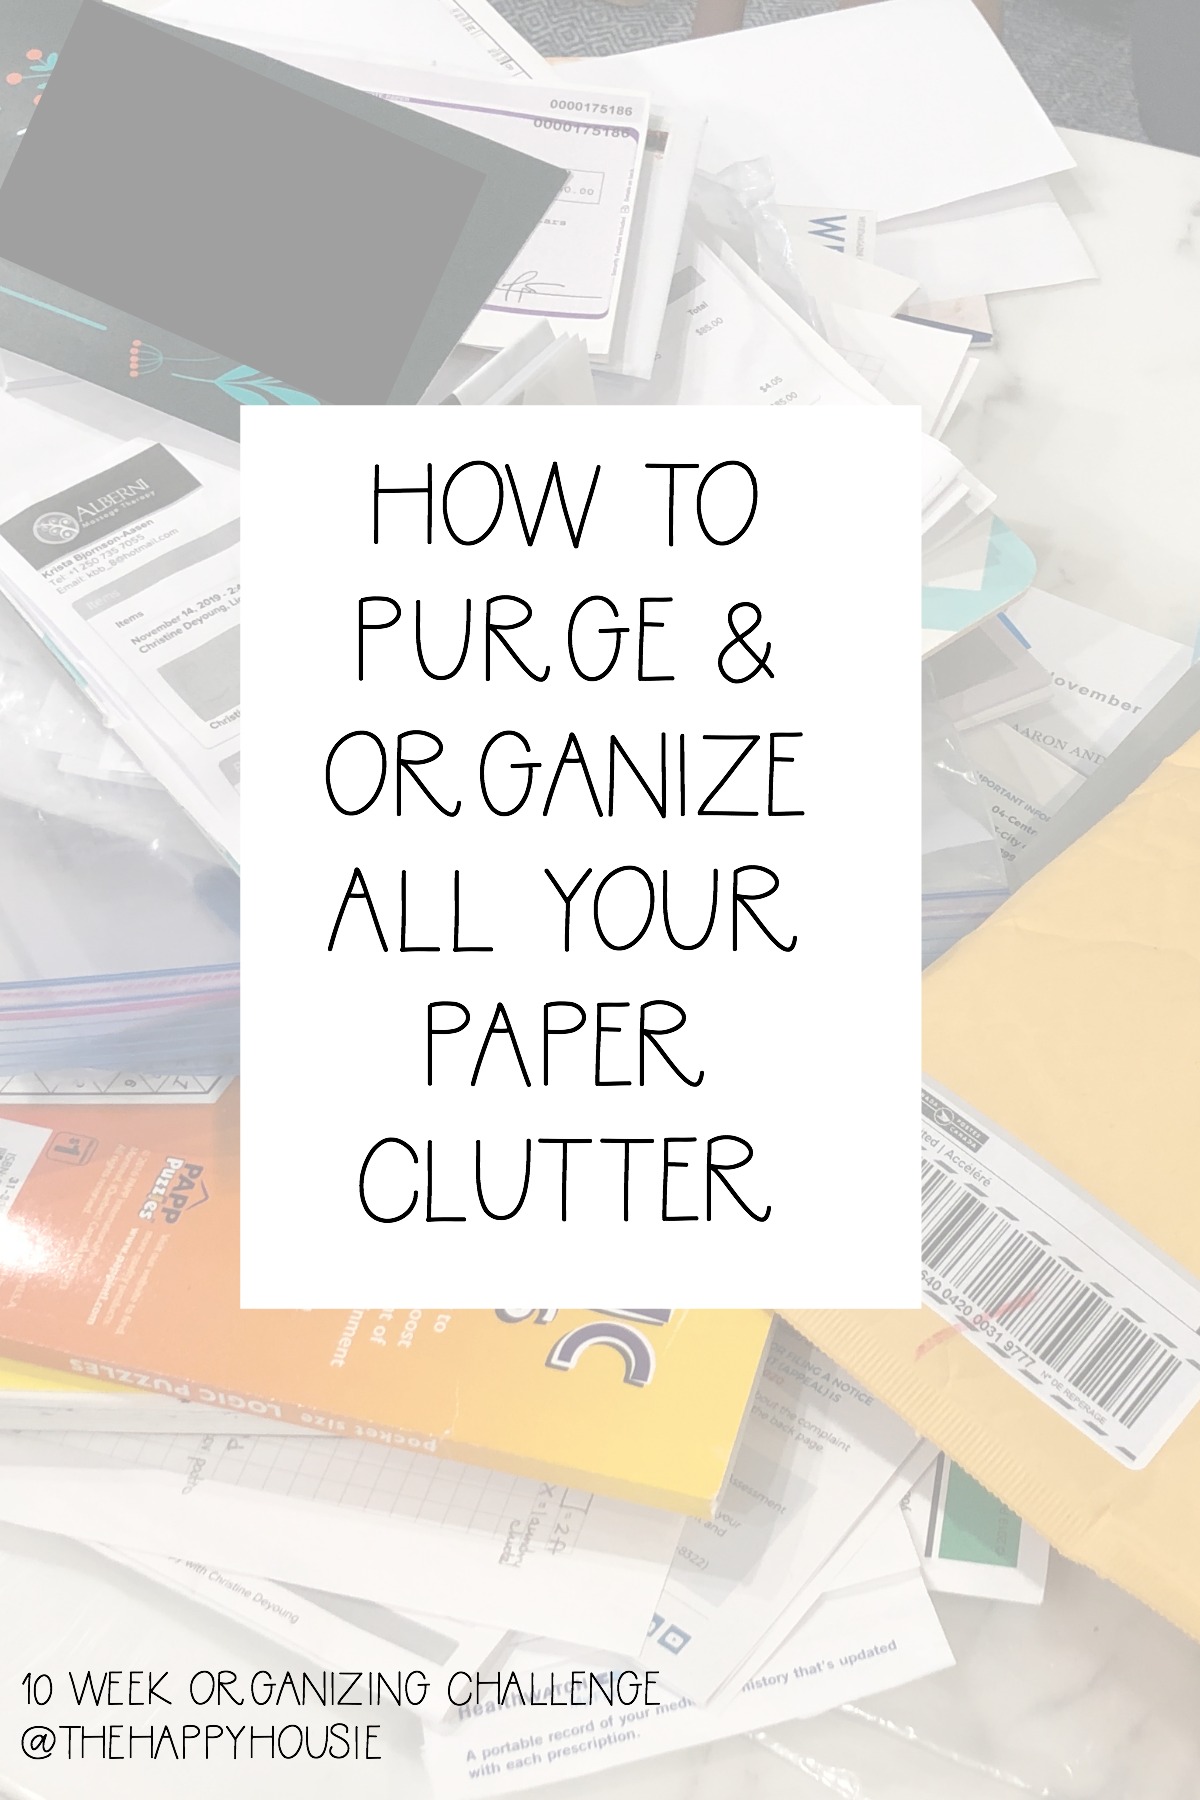 How to purge and organize paper clutter graphic.